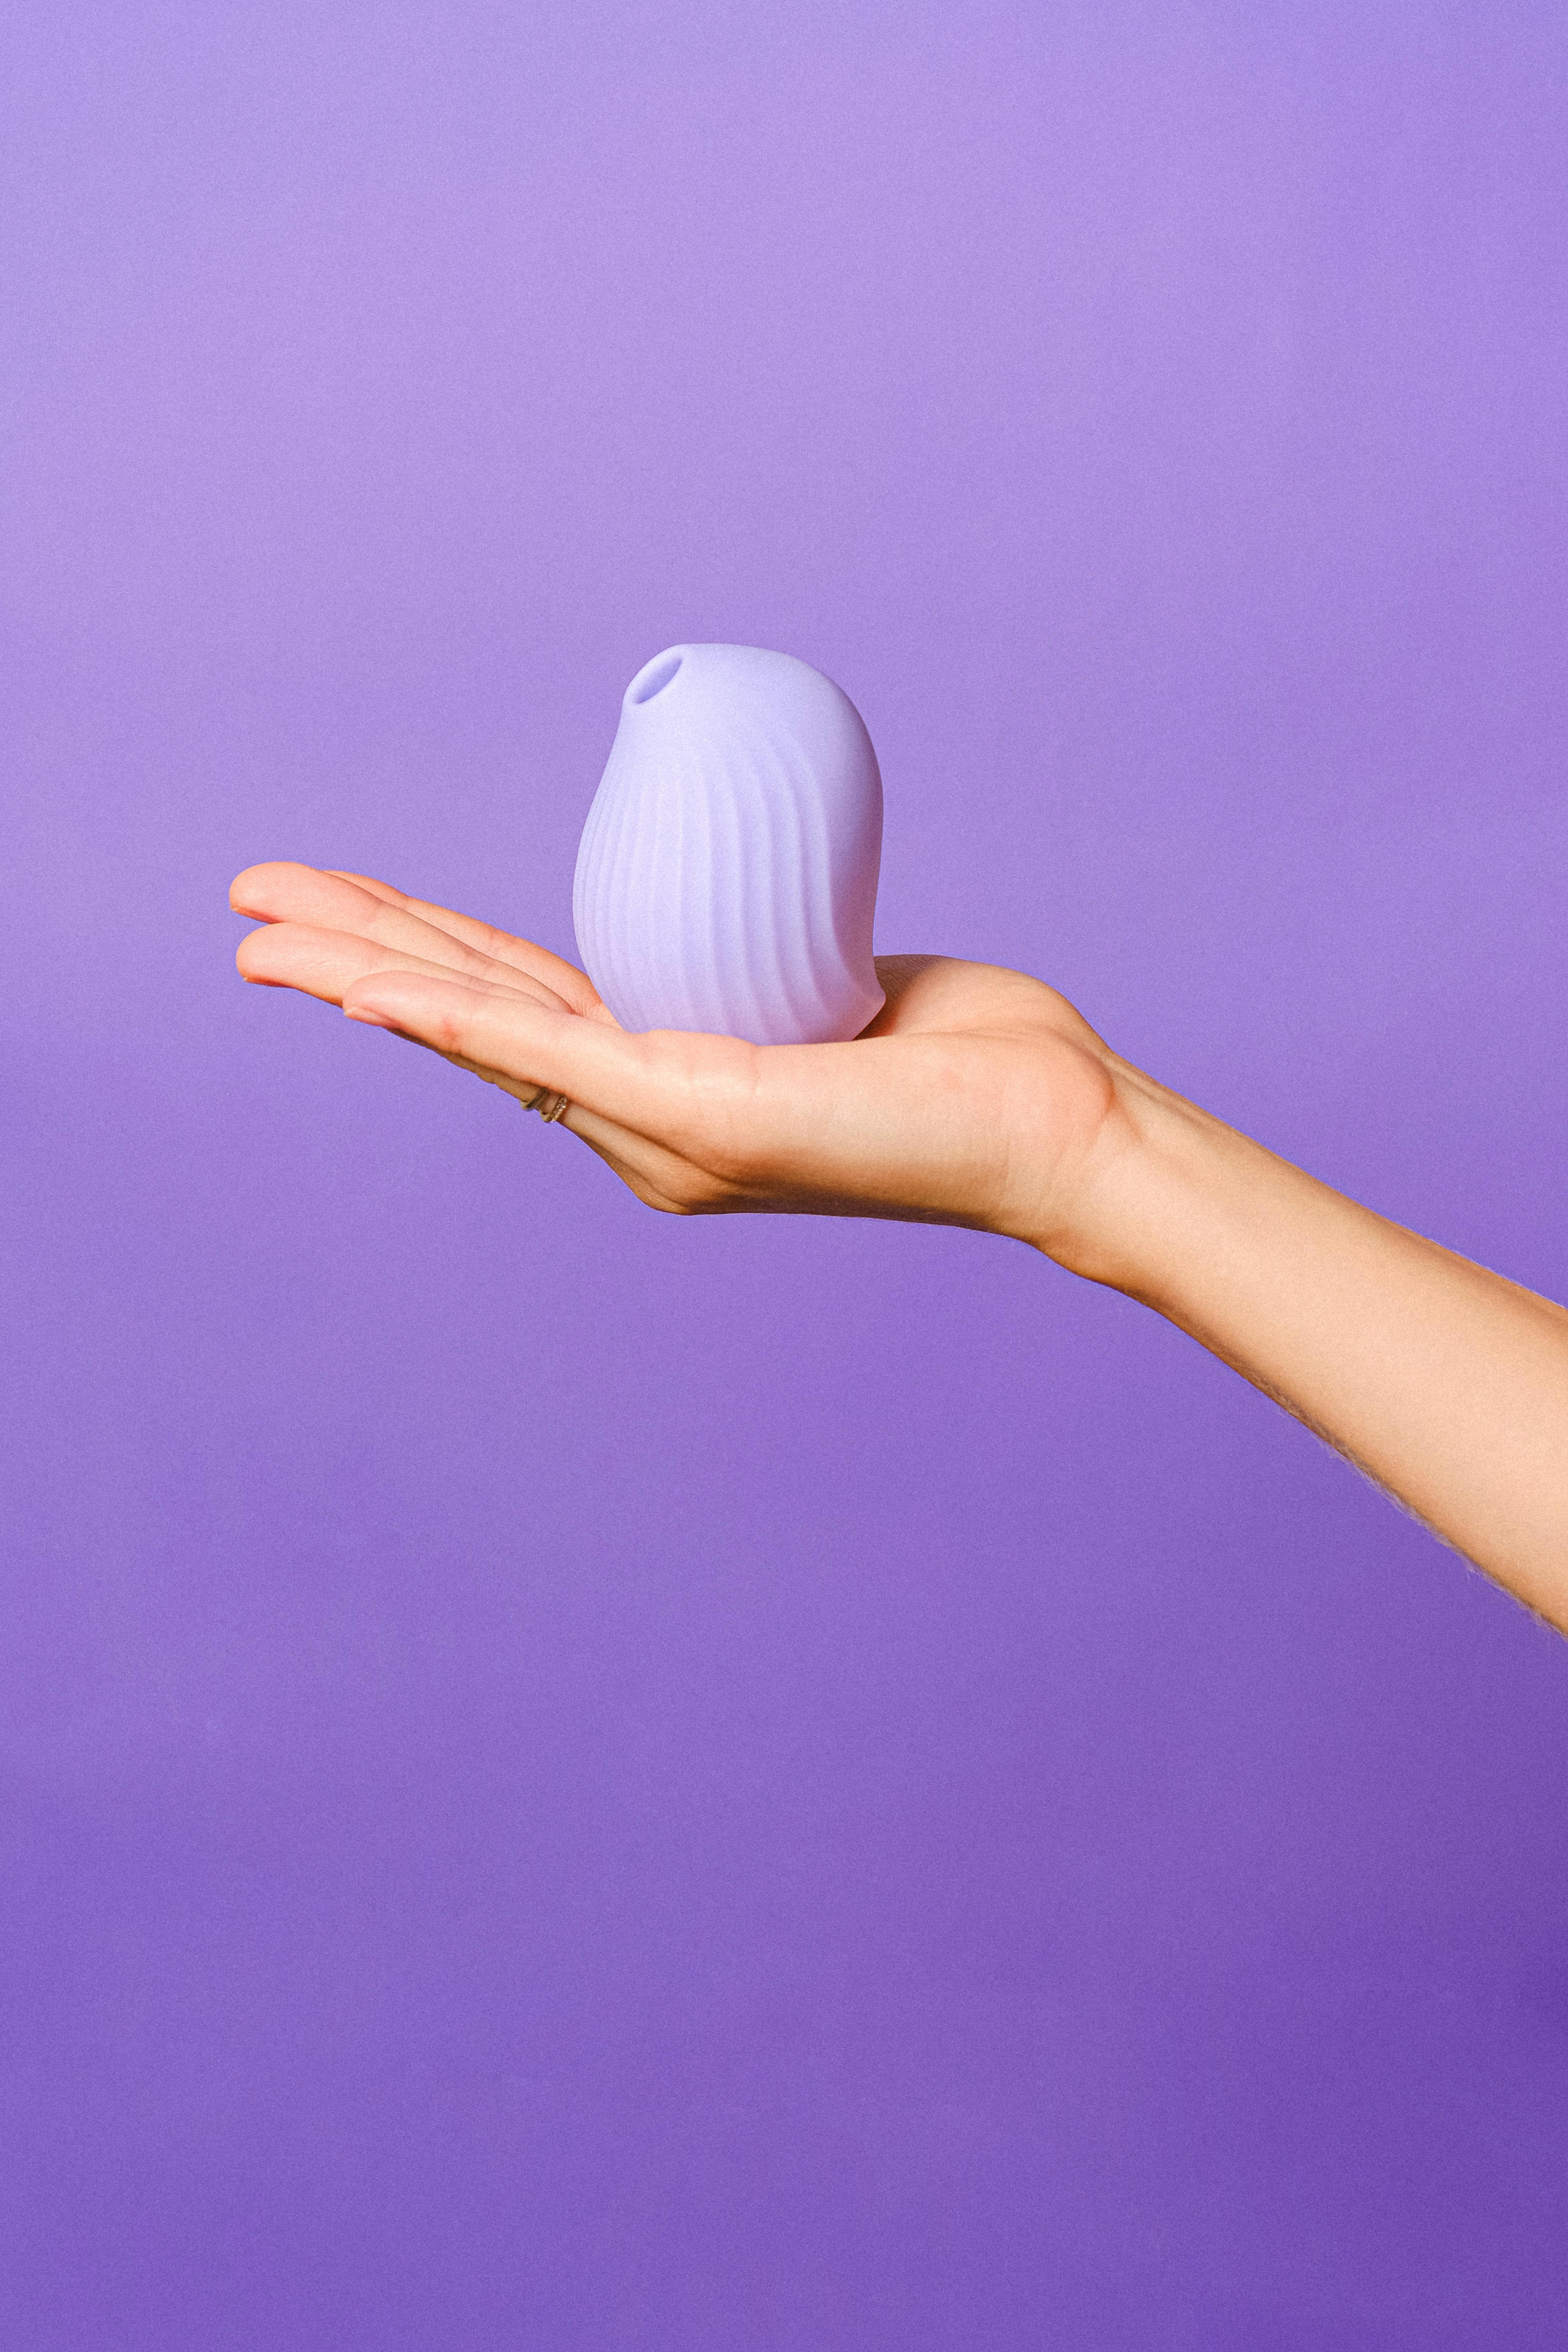 hand with a silicone sex toy